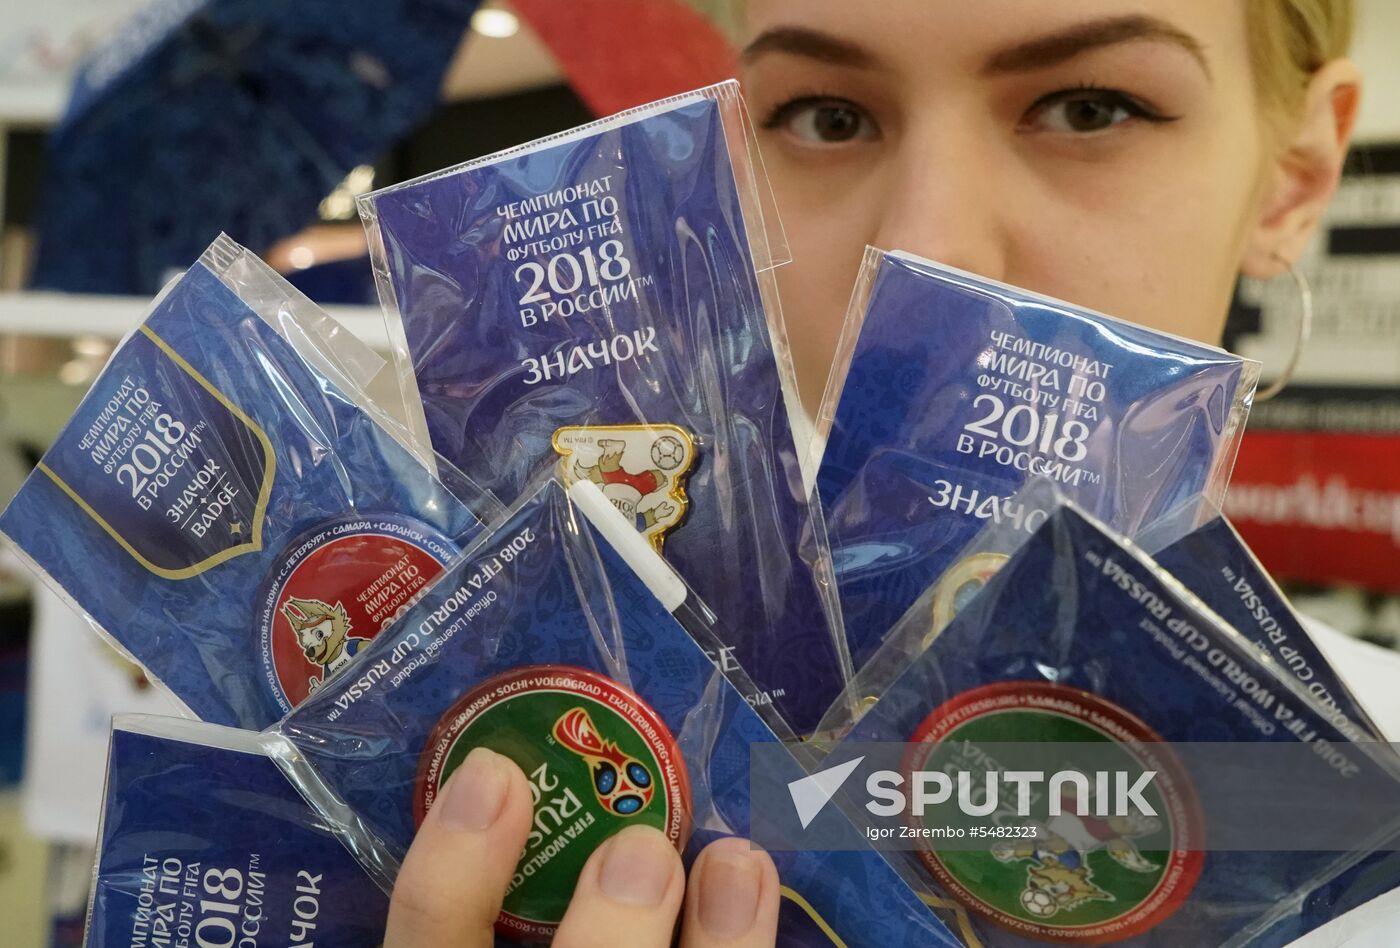 Shop selling attributes of 2018 FIFA World Cup in Kaliningrad